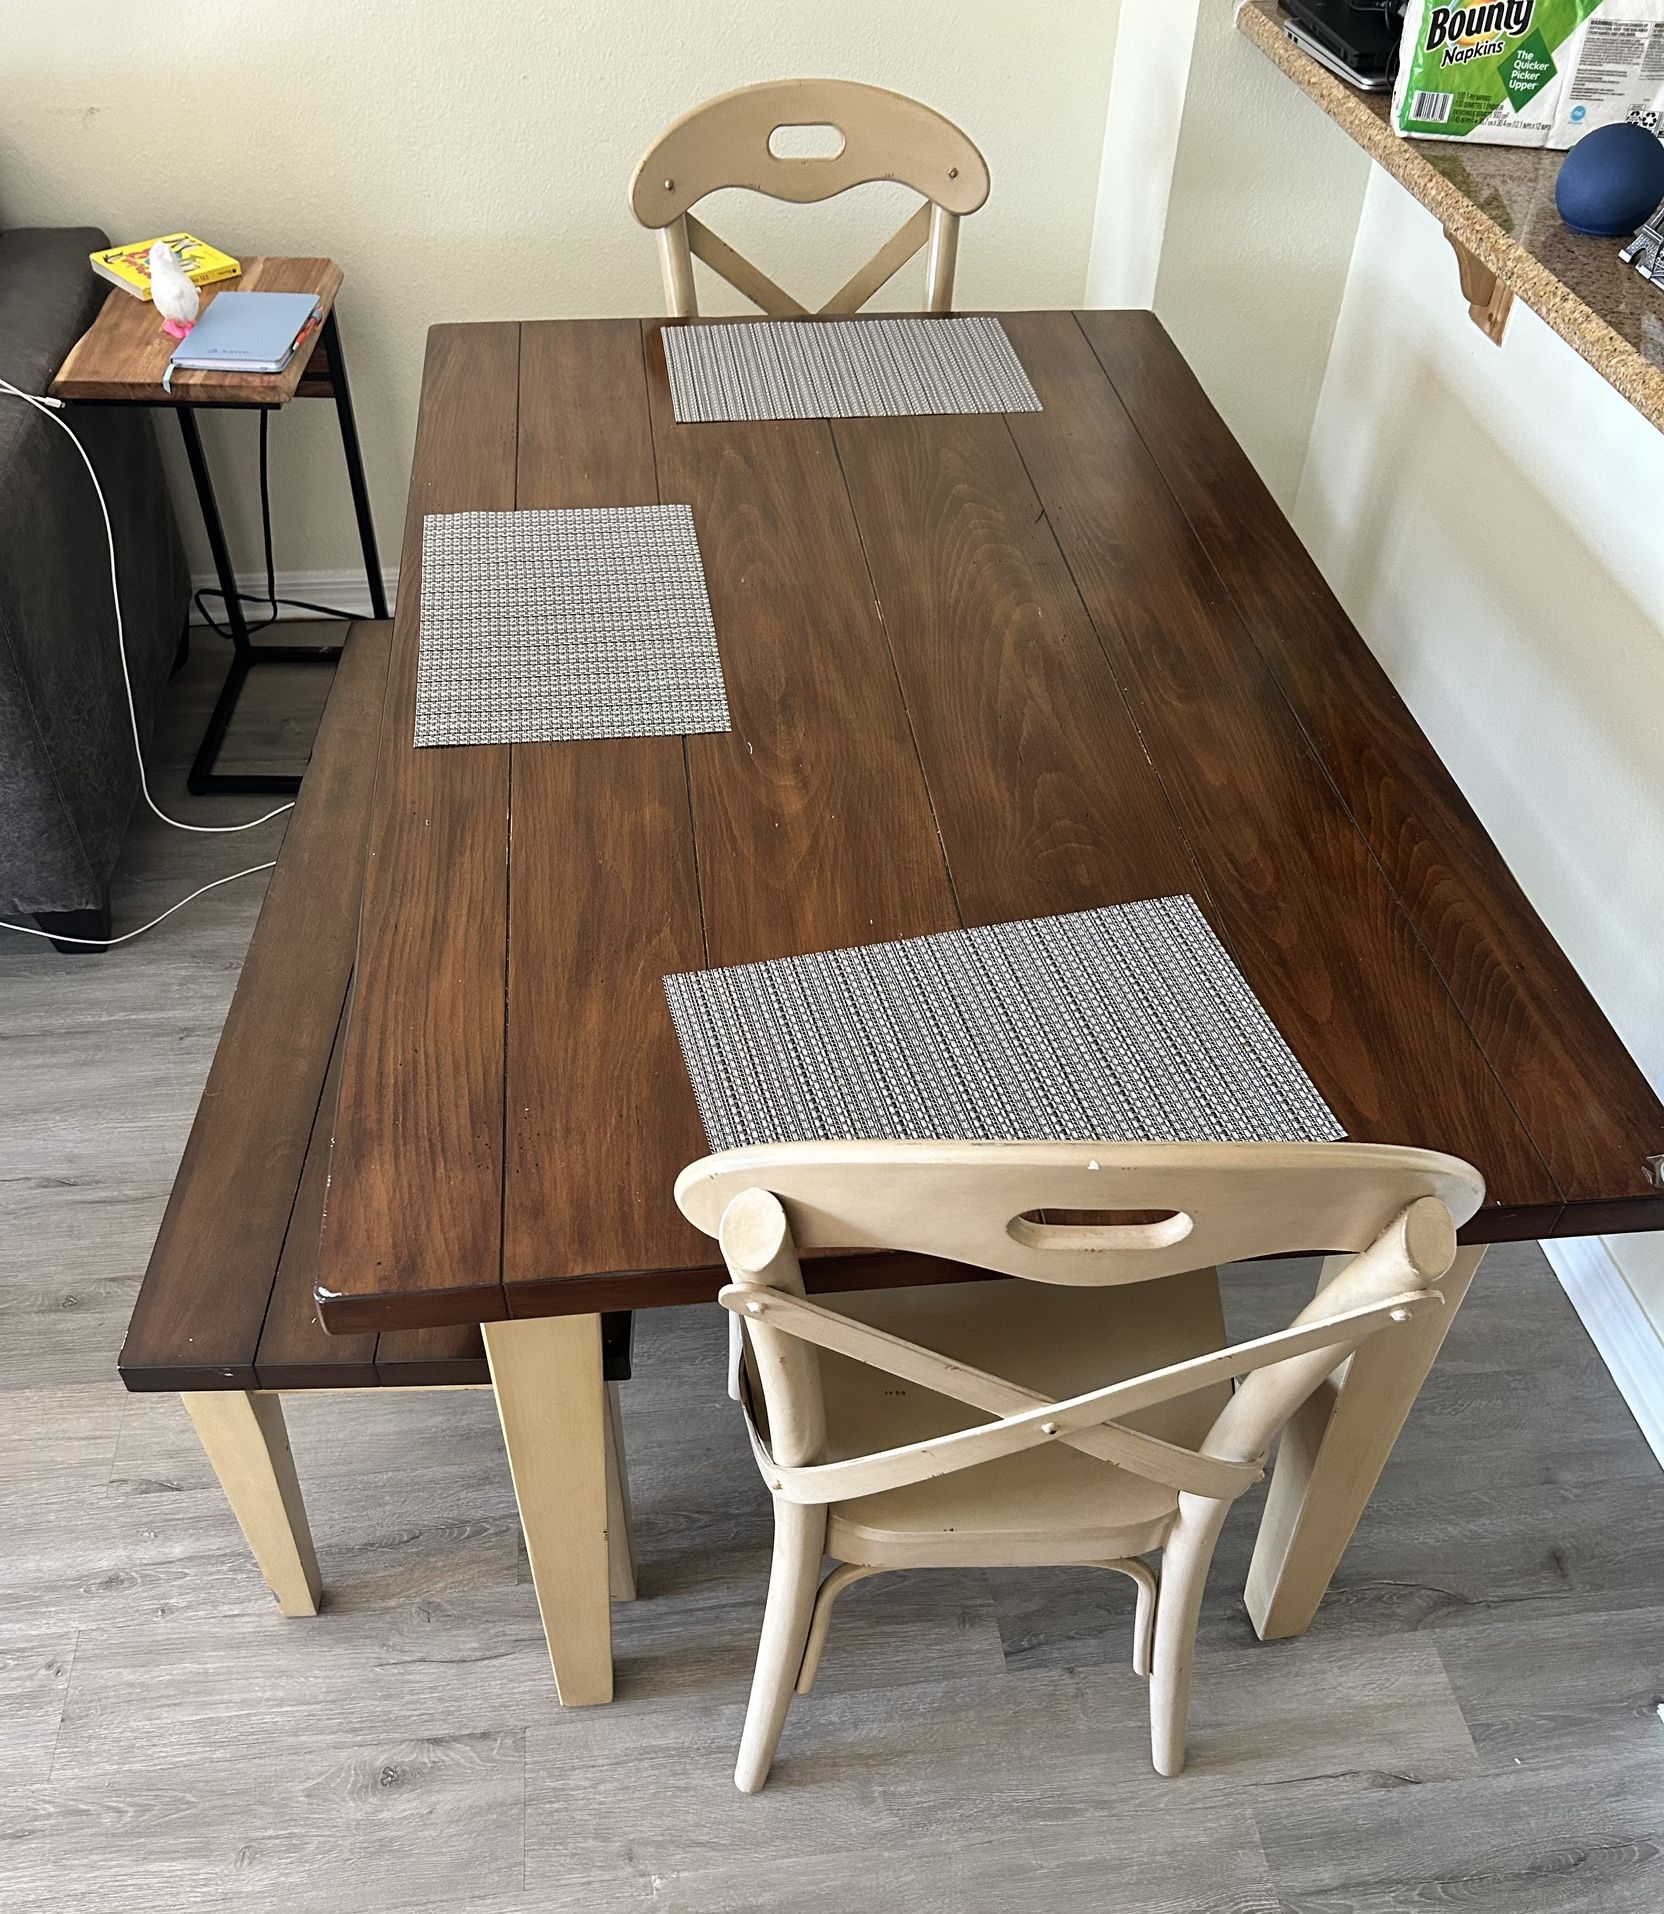 Pier 1 - 6pc Wood Dining Table